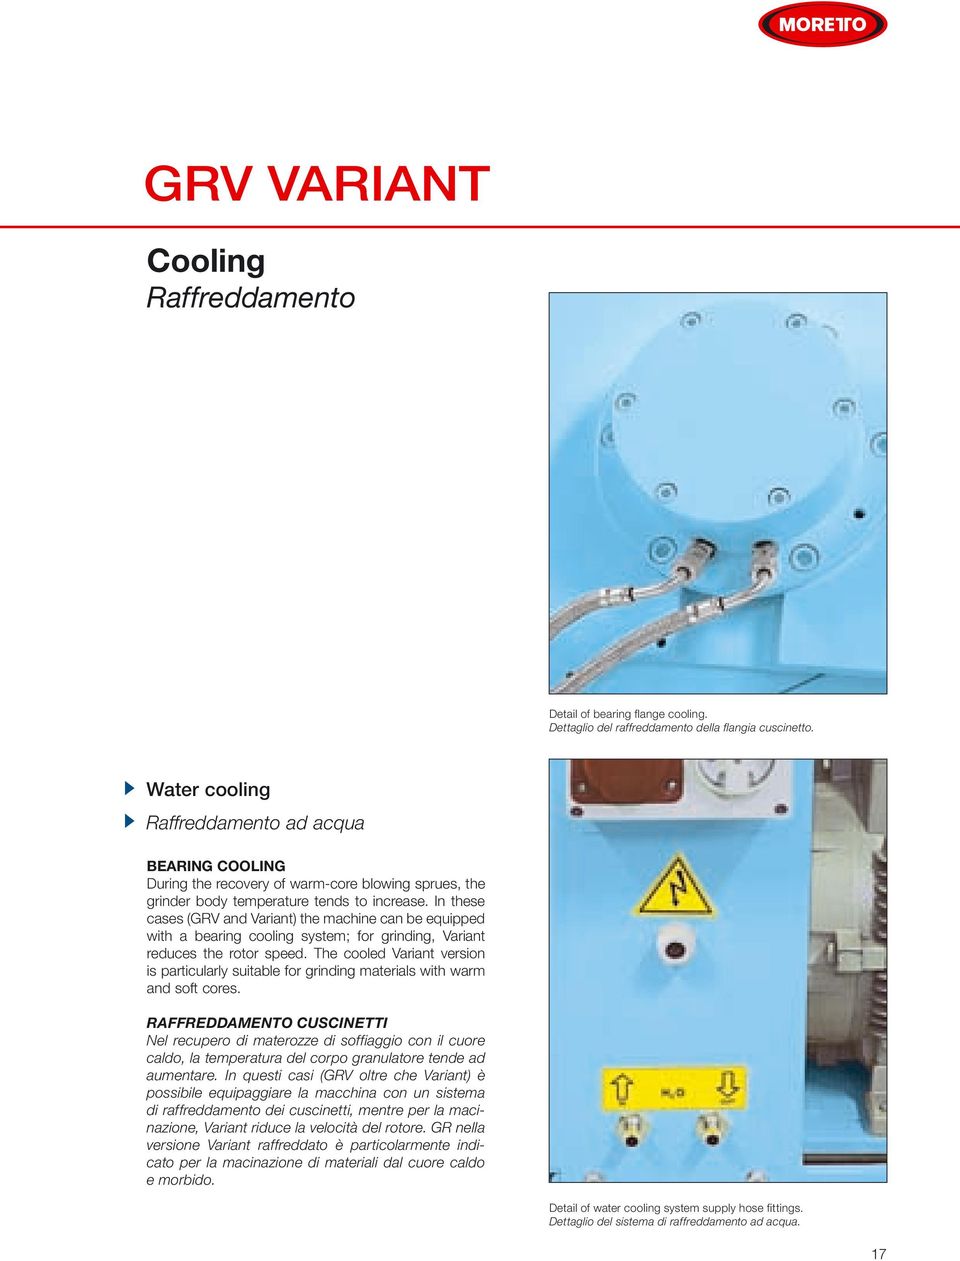 In these cases (GRV and Variant) the machine can be equipped with a bearing cooling system; for grinding, Variant reduces the rotor speed.